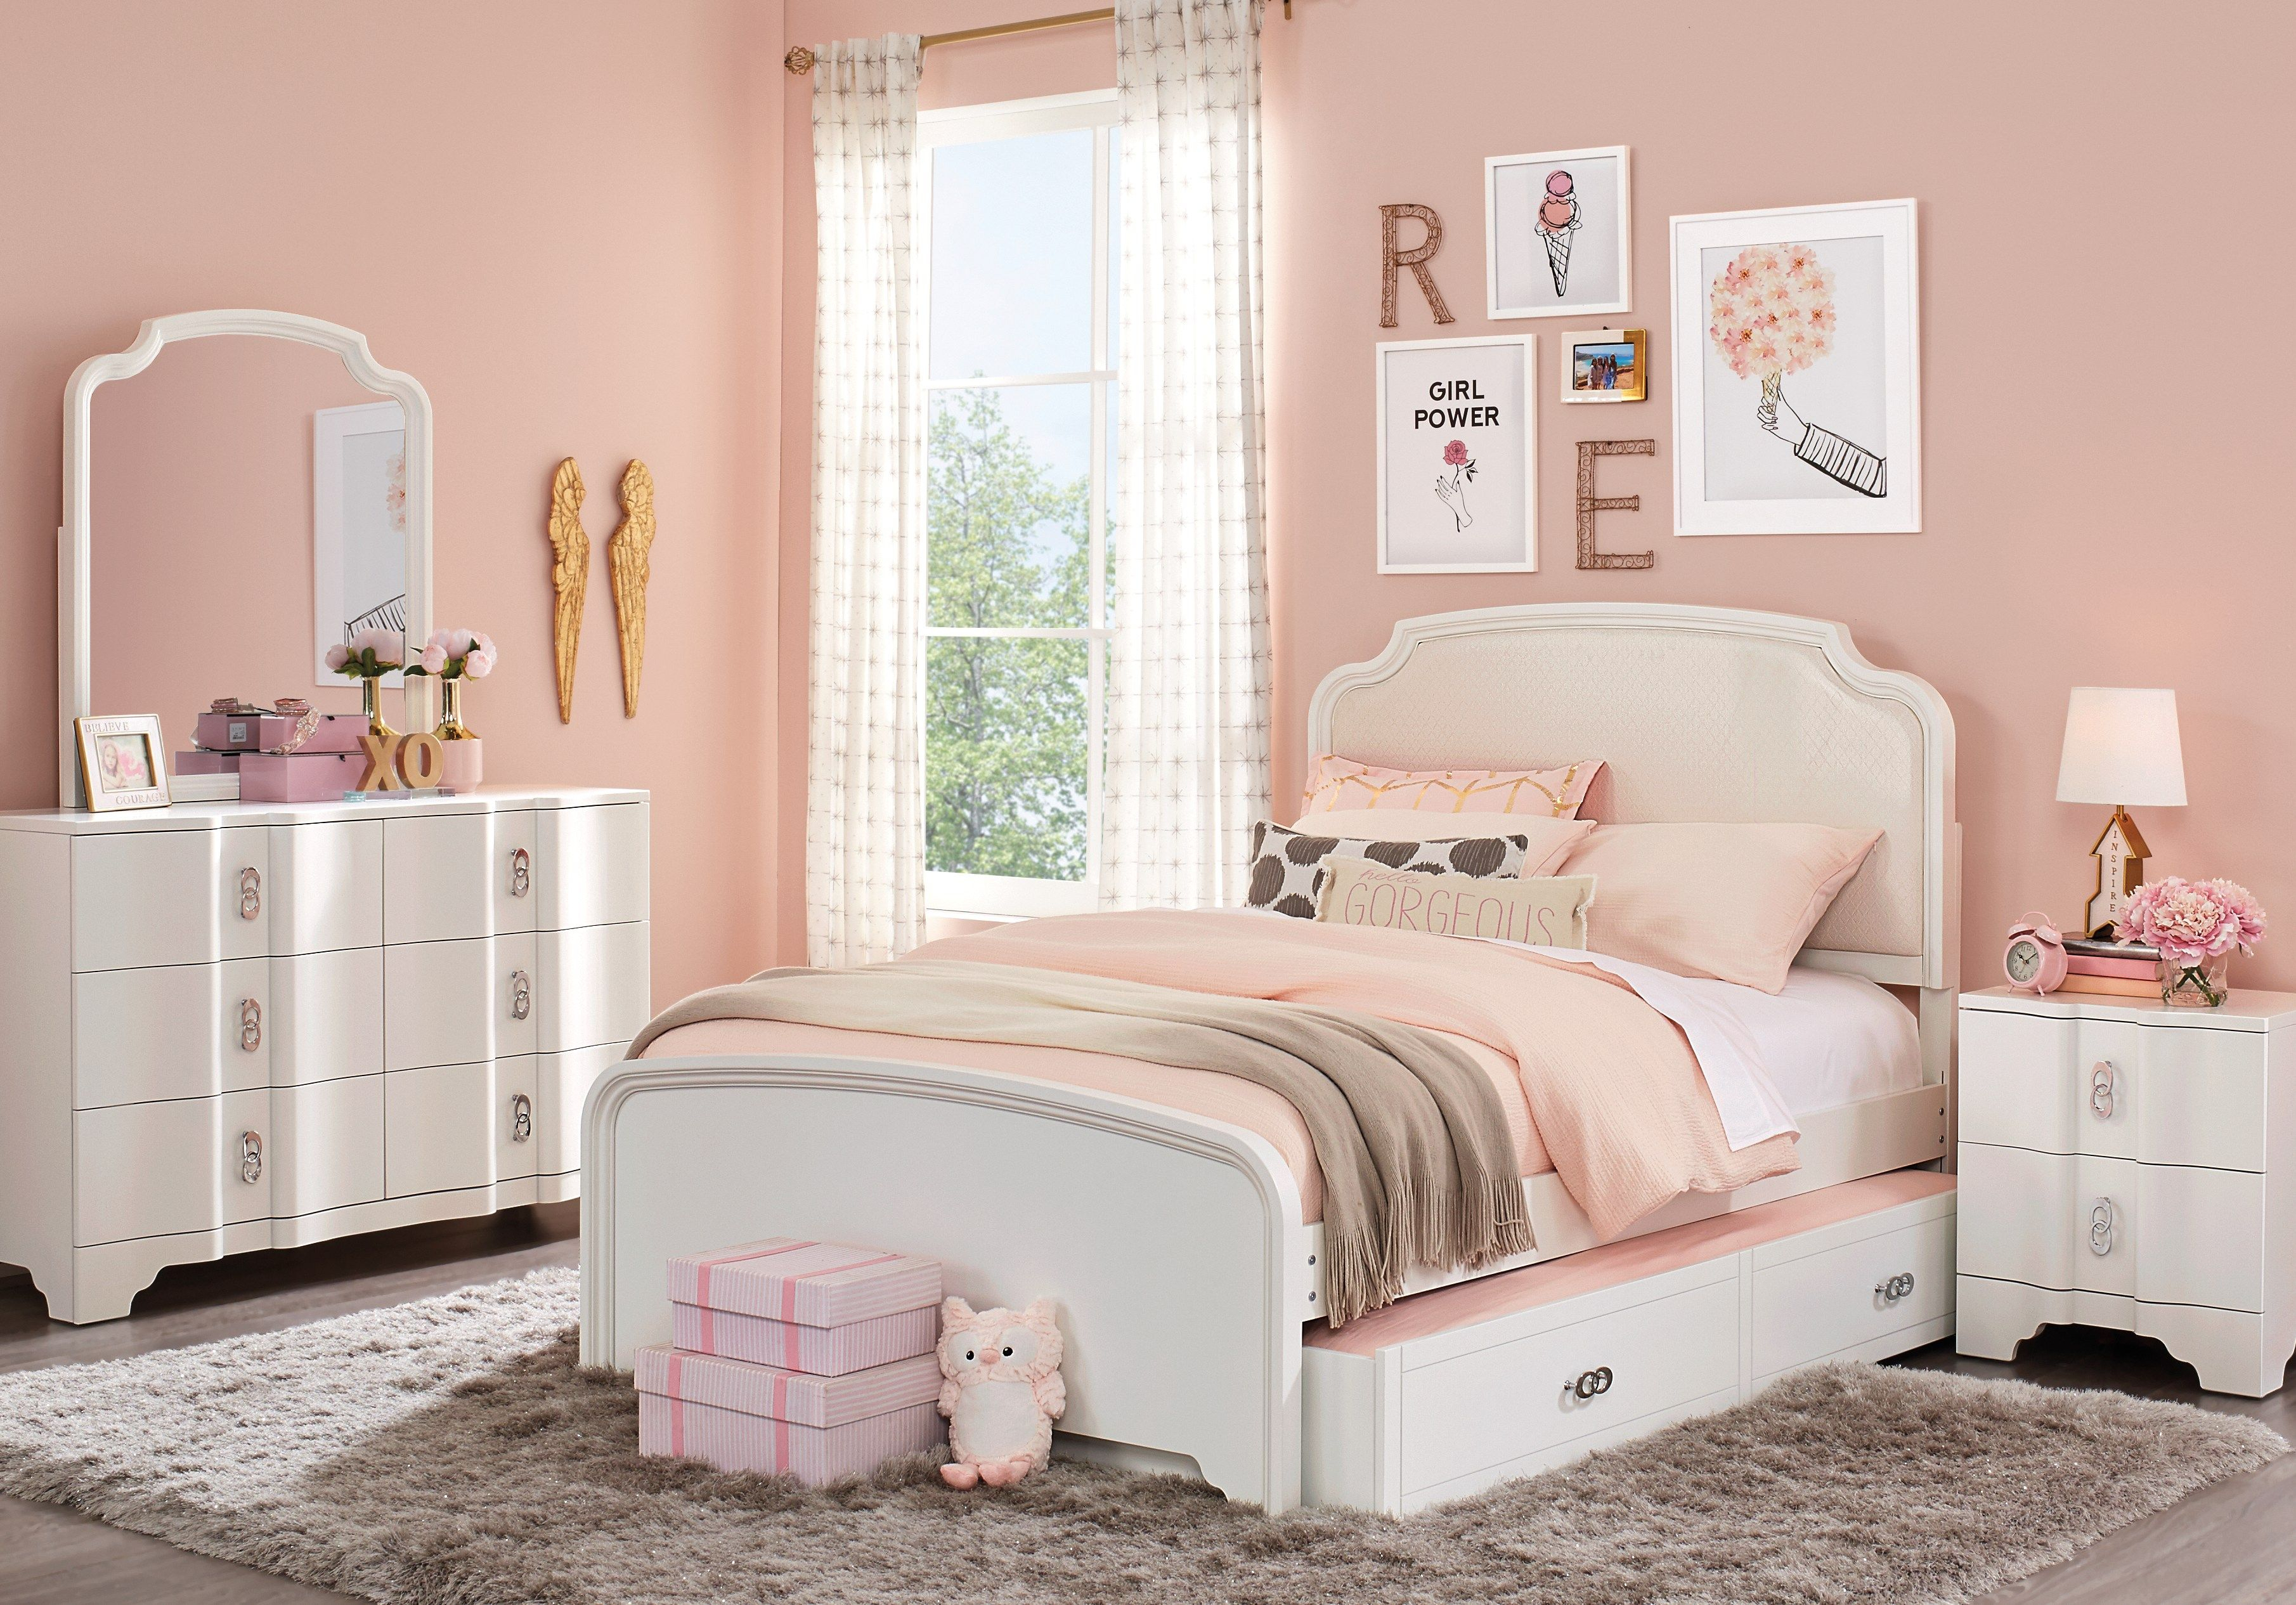 Rylee White 5 Pc Full Upholstered Bedroom Teen Bedroom Sets Colors for dimensions 3621 X 2531